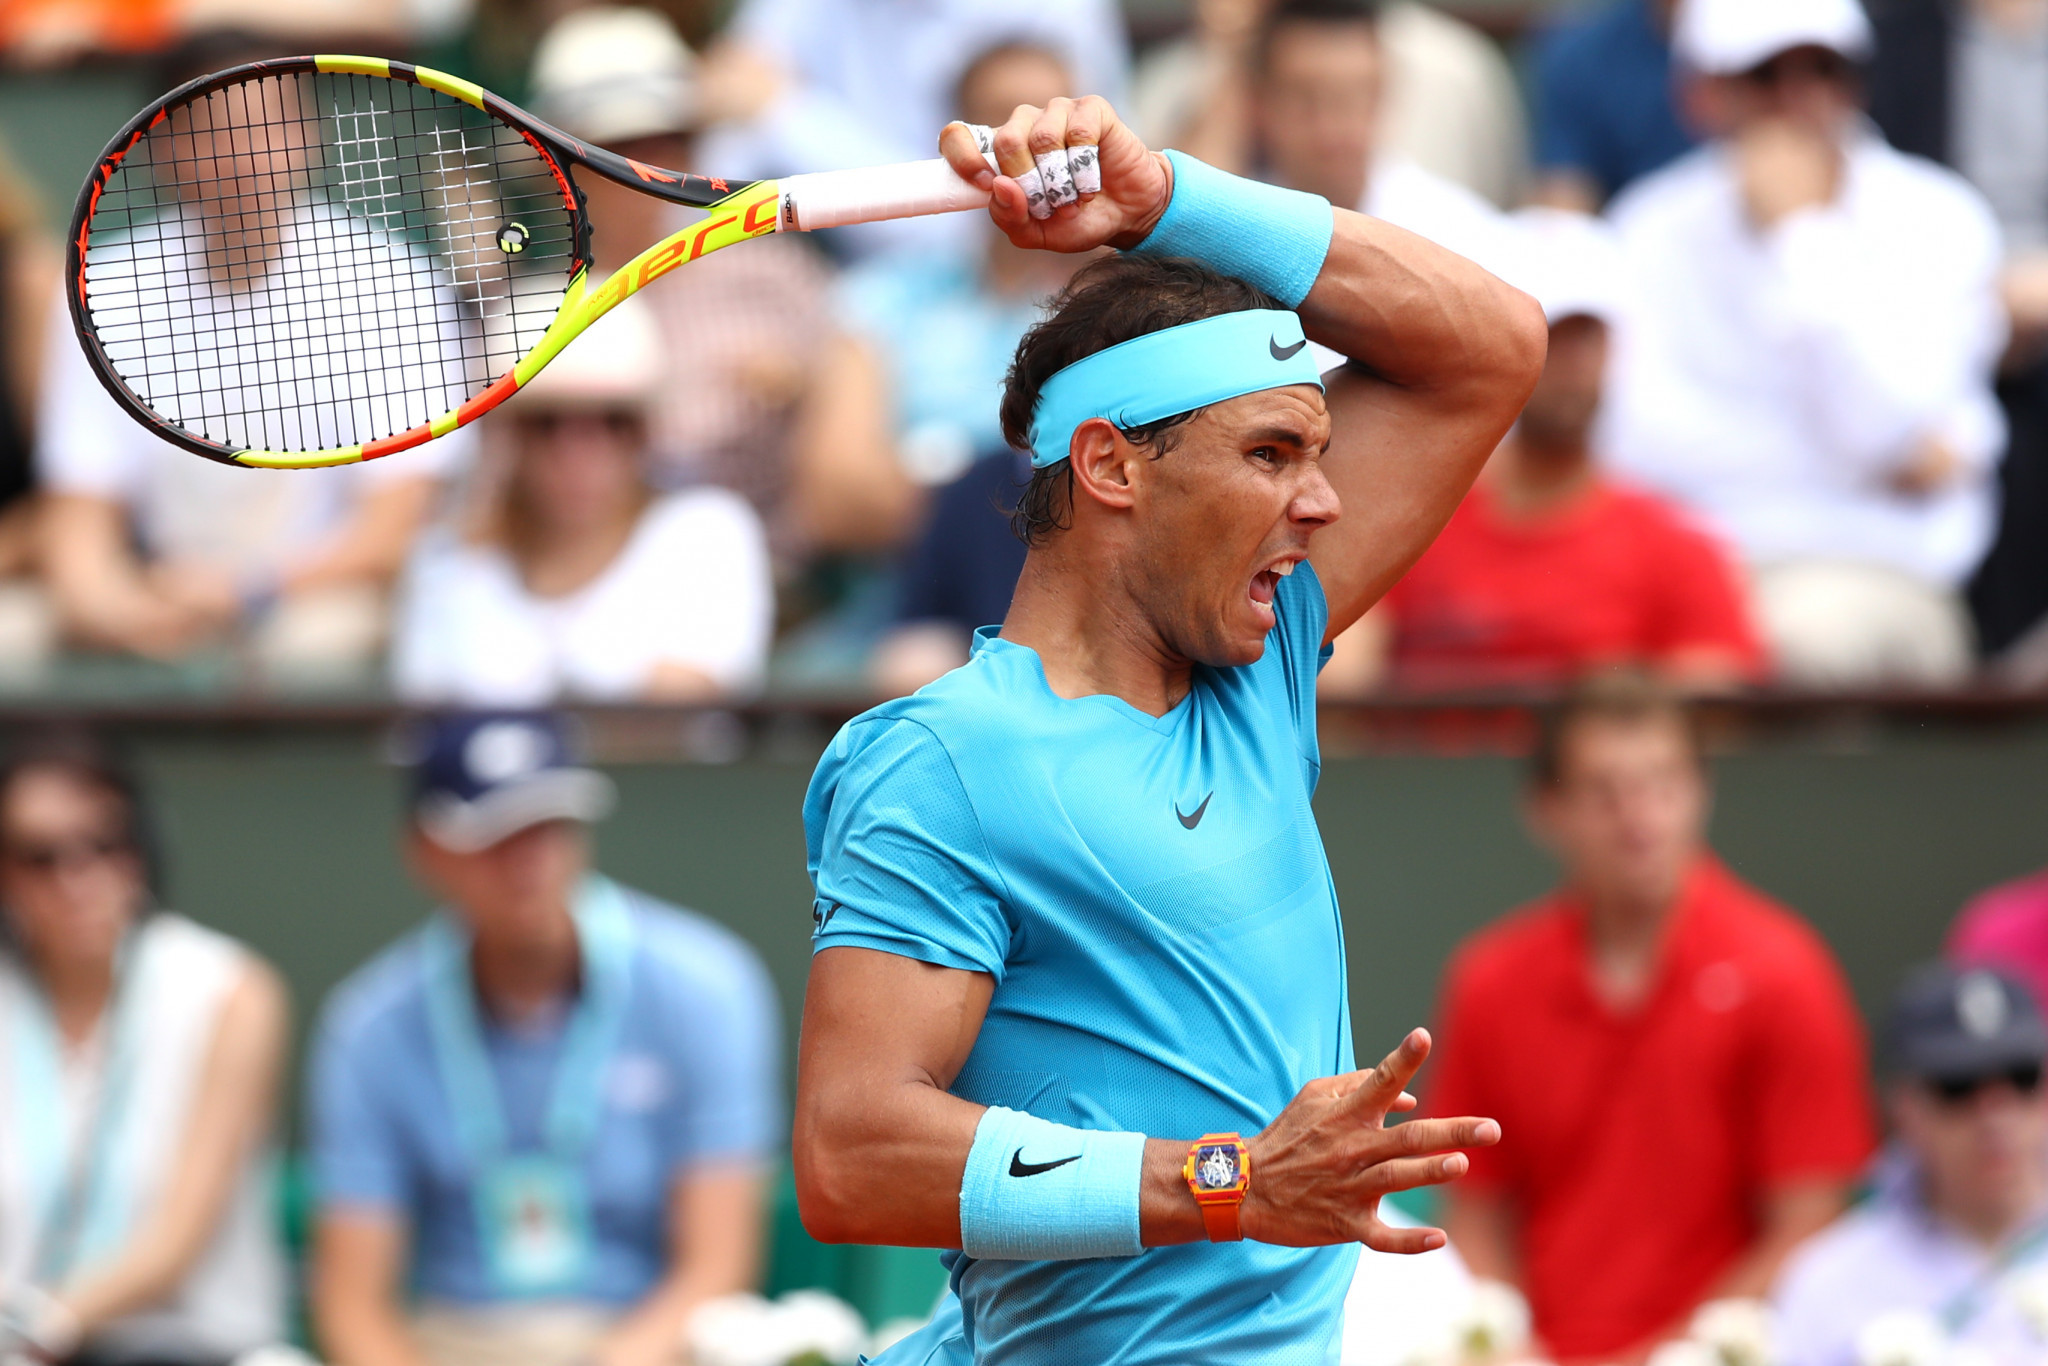 Nadal thrashes Gasquet as he continues quest for 11th French Open title